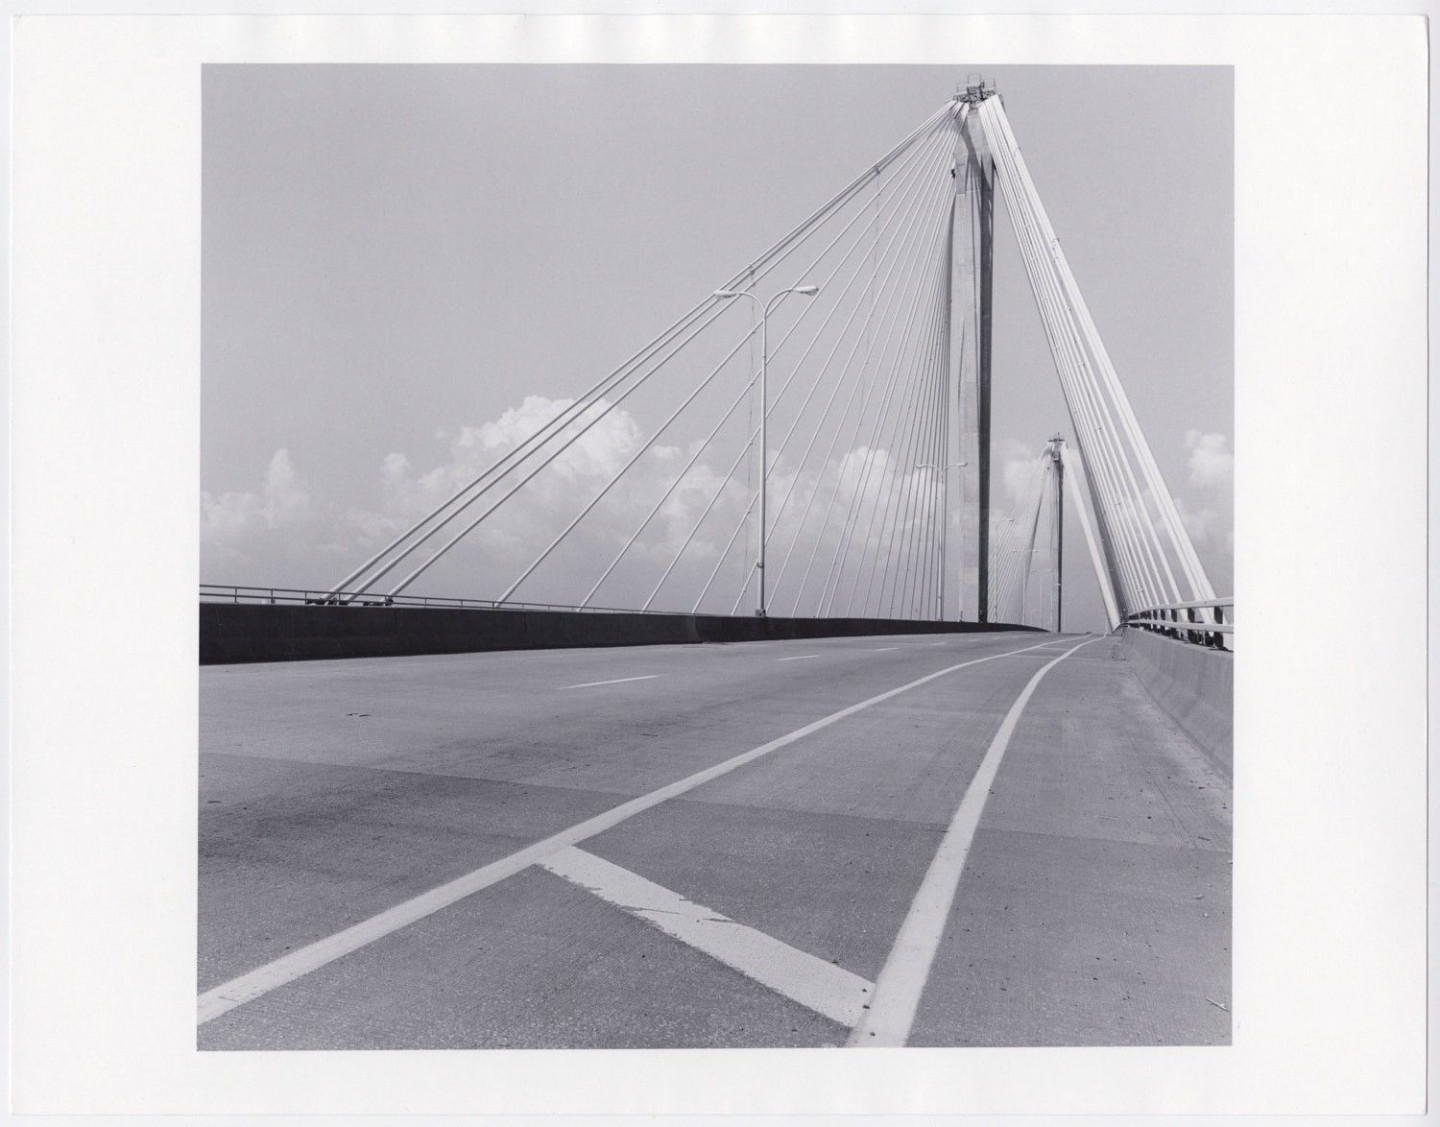 The Clark Bridge, a span of bridge moves across the bottom of the frame, turning slightly, arcing away. Above, only sky and suspension lines